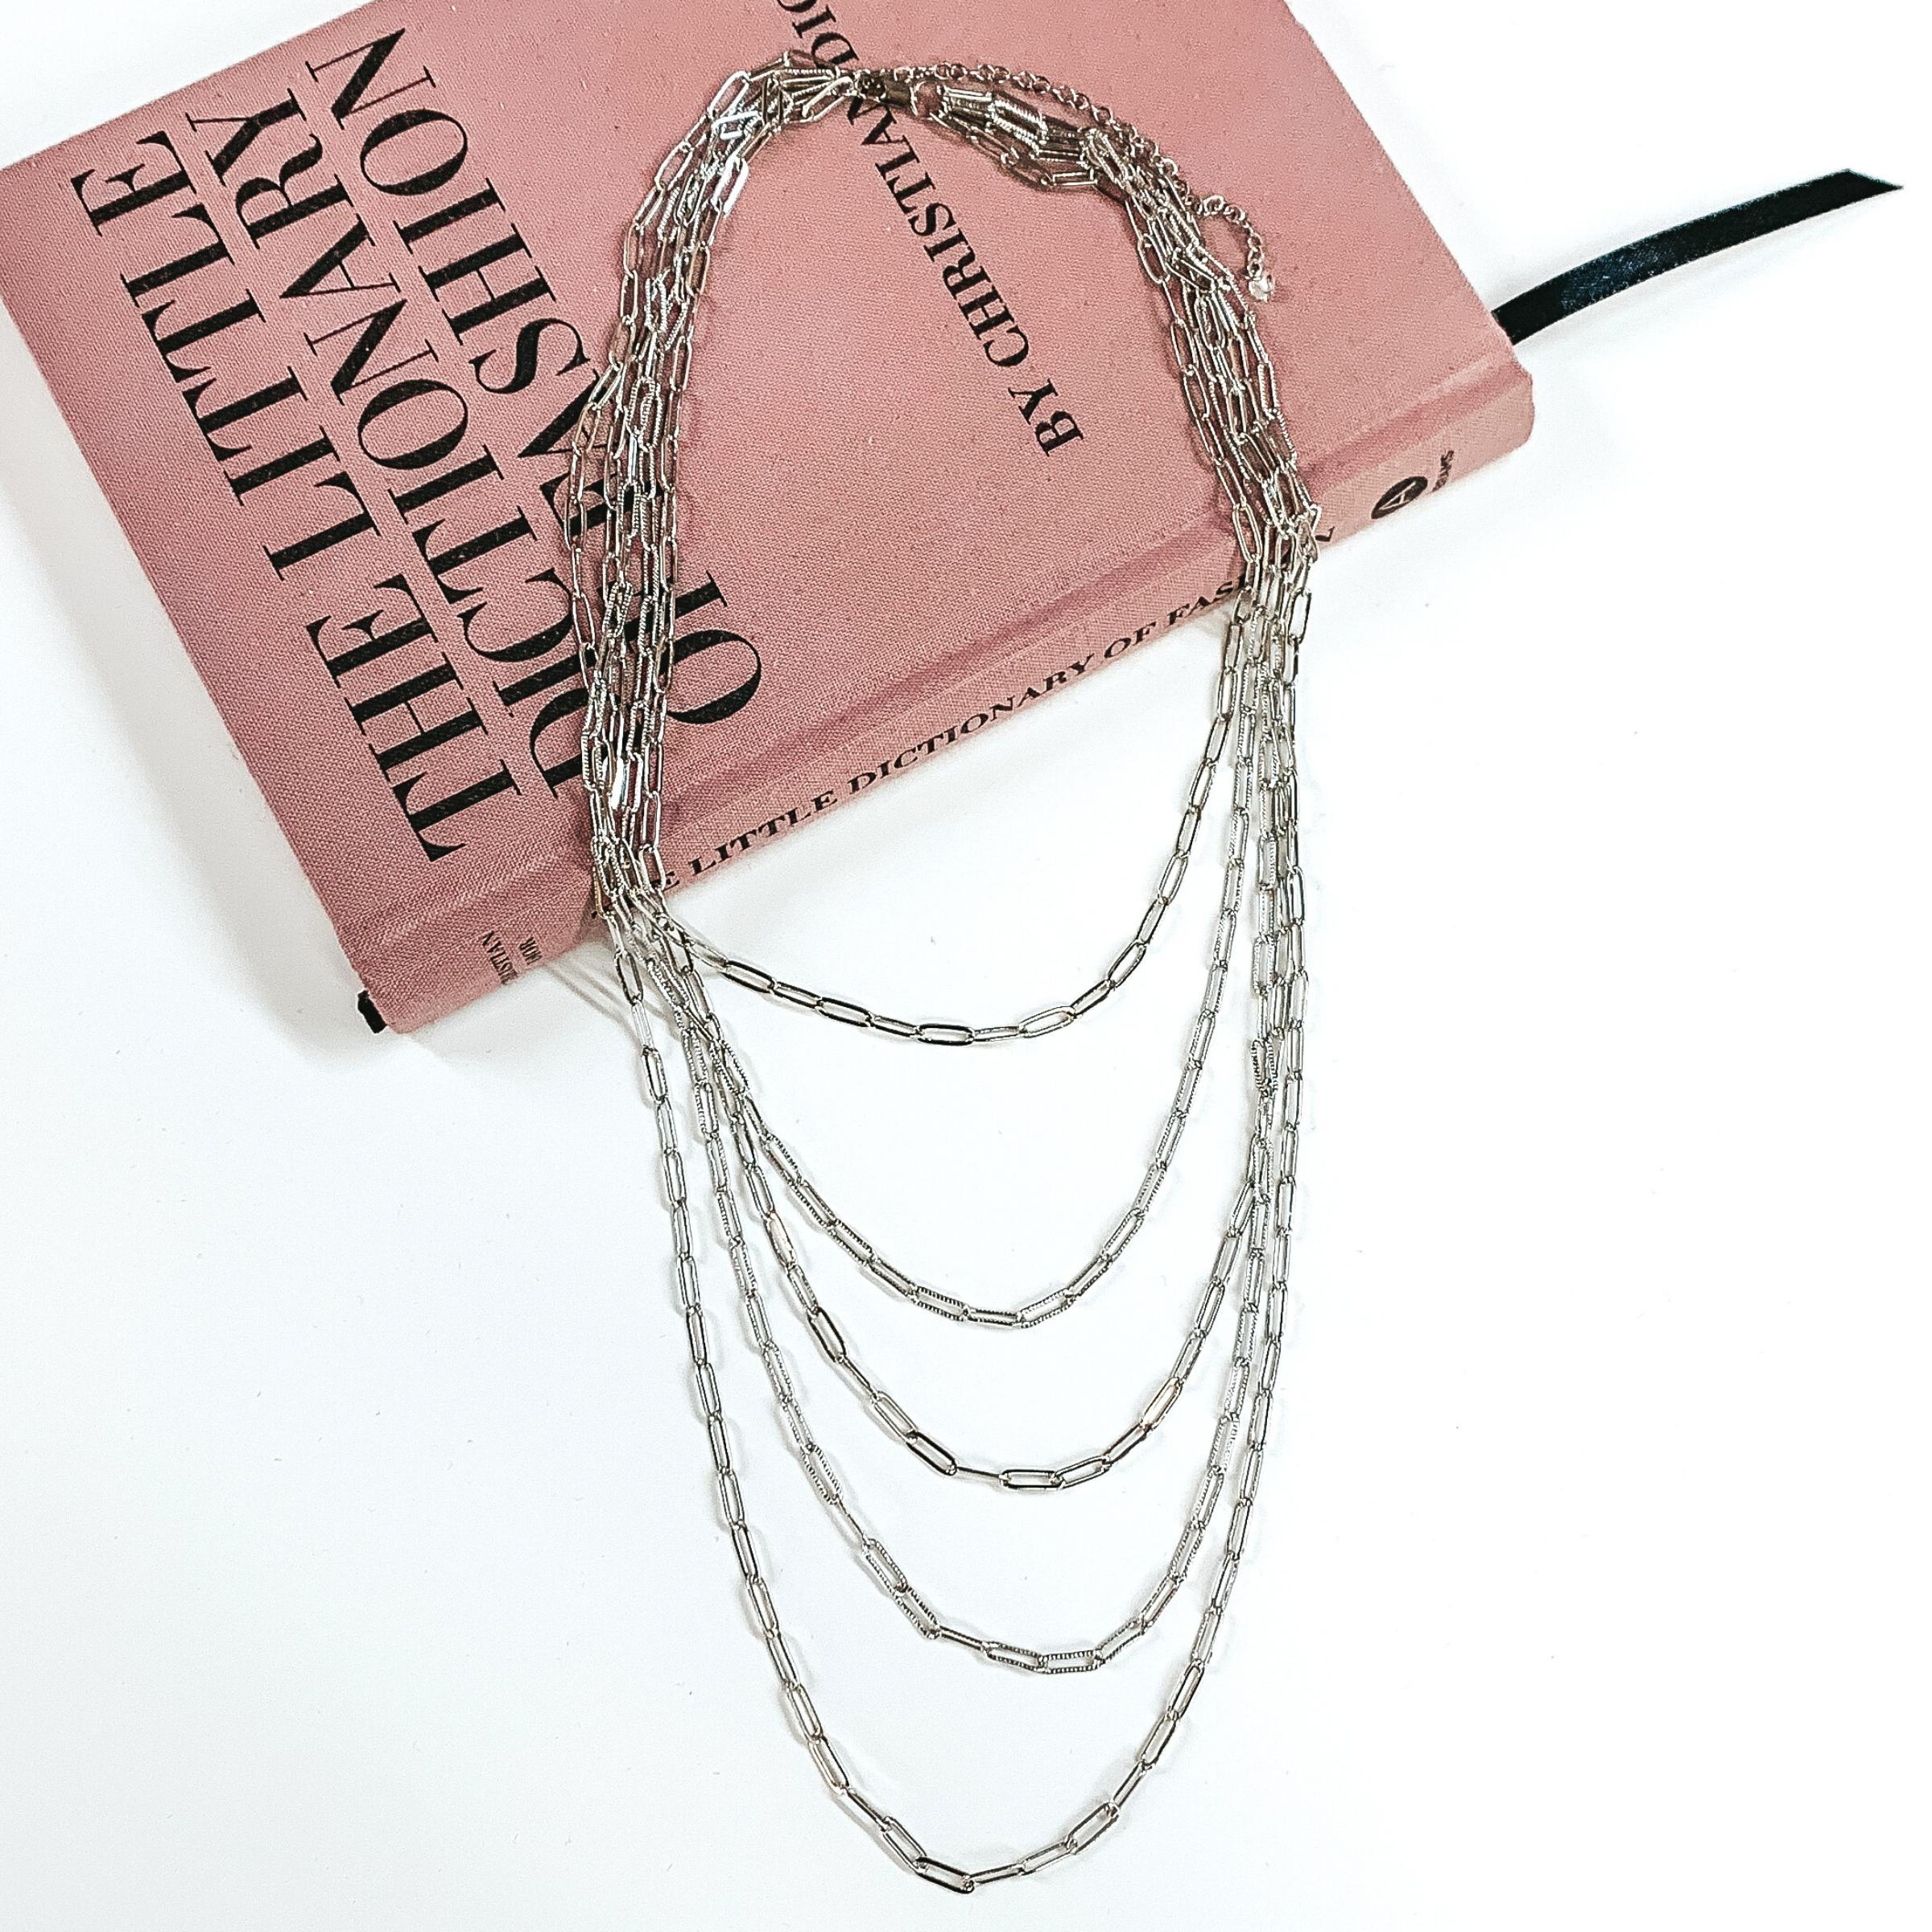 5 layered silver paperclip chained necklace. This necklace is pictured laying partially on a mauve colored book on a white background. 